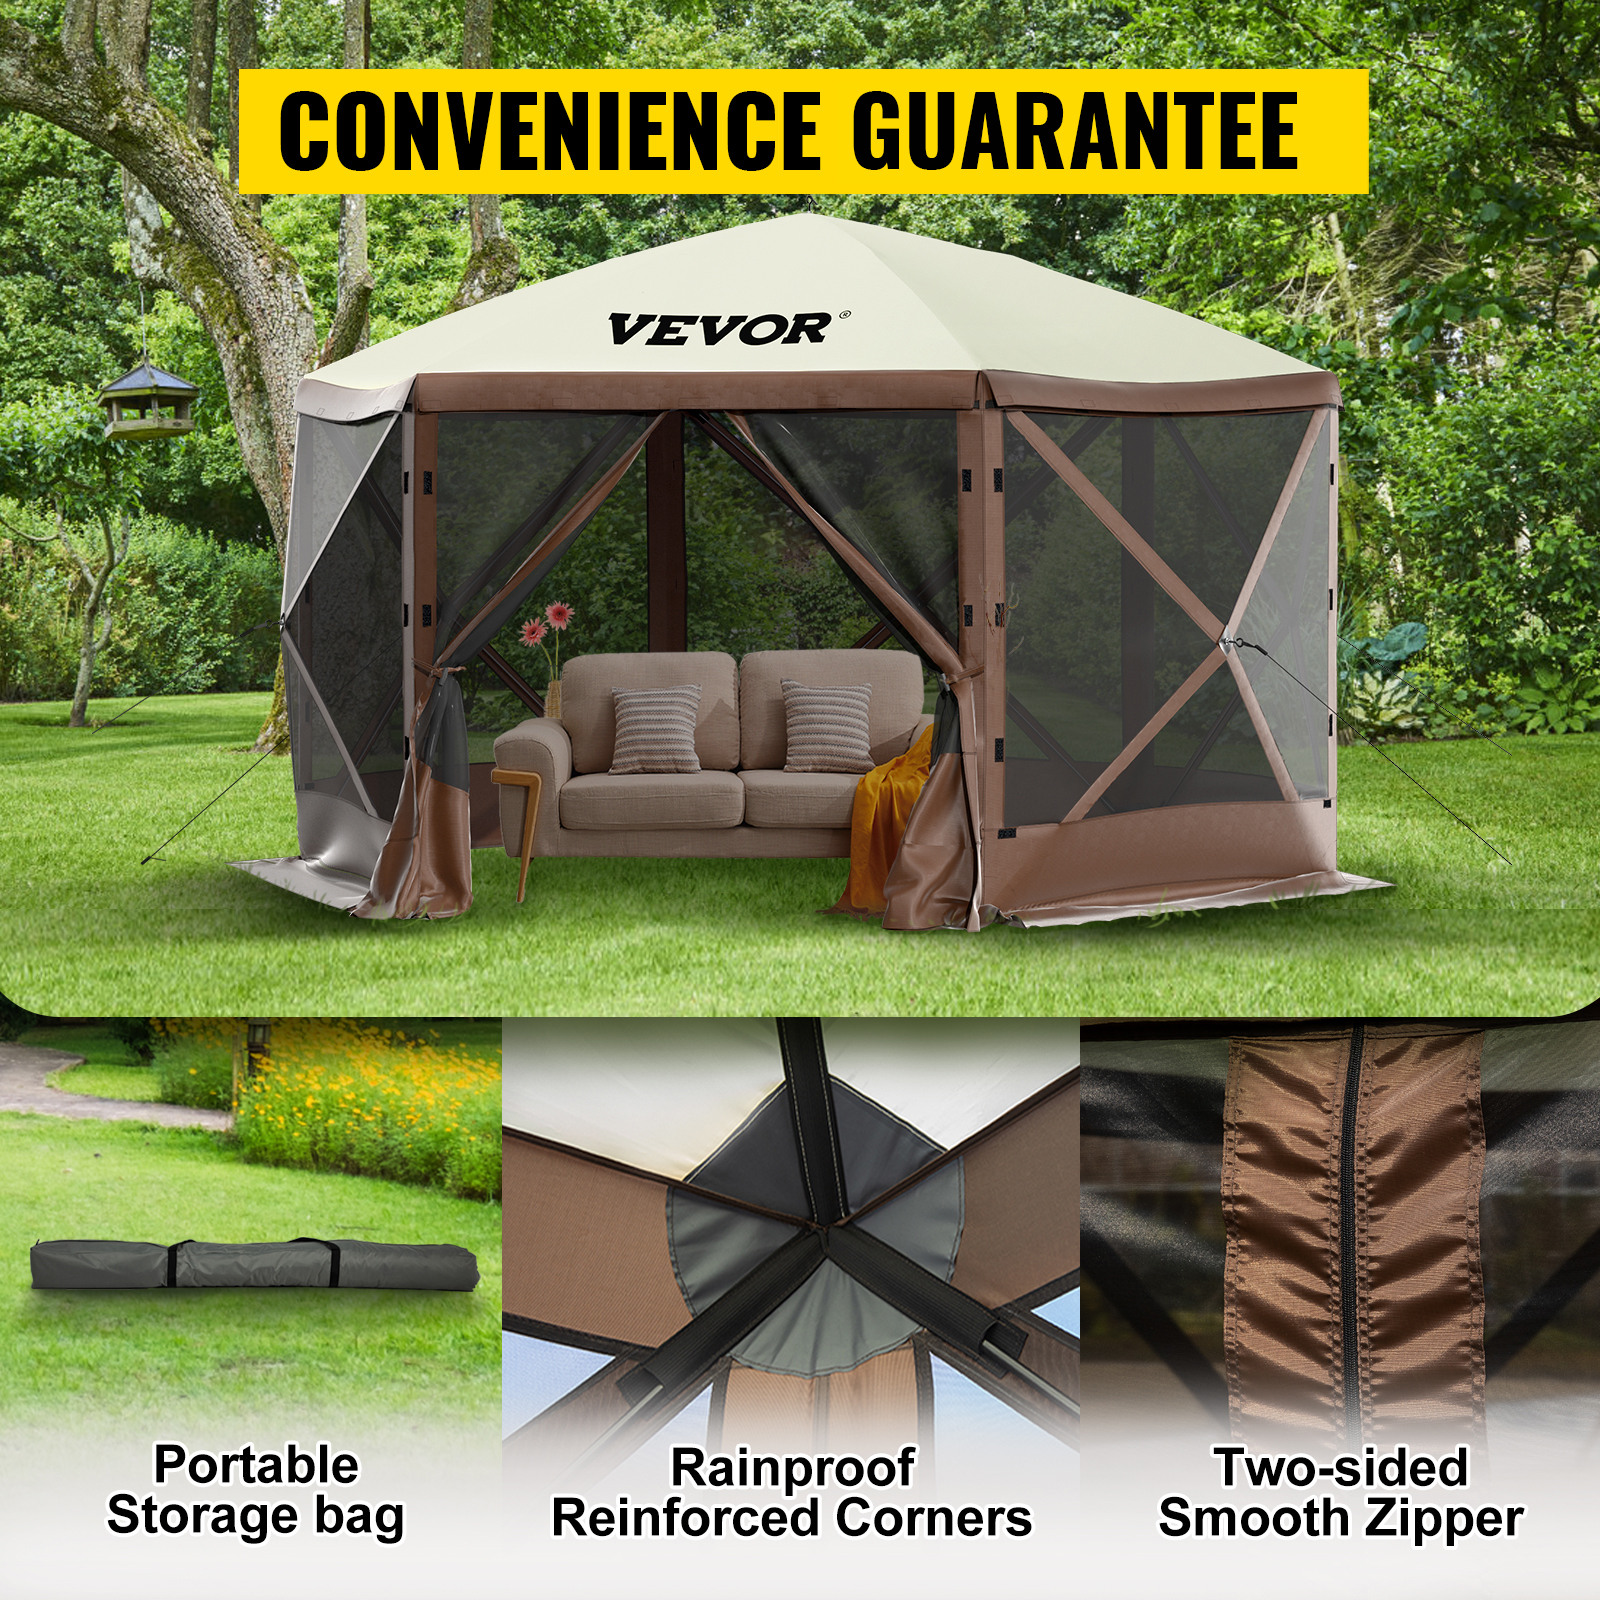 https://d2qc09rl1gfuof.cloudfront.net/product/MZY612FT12FT604DR/6-sided-canopy-shelter-m100-6.jpg